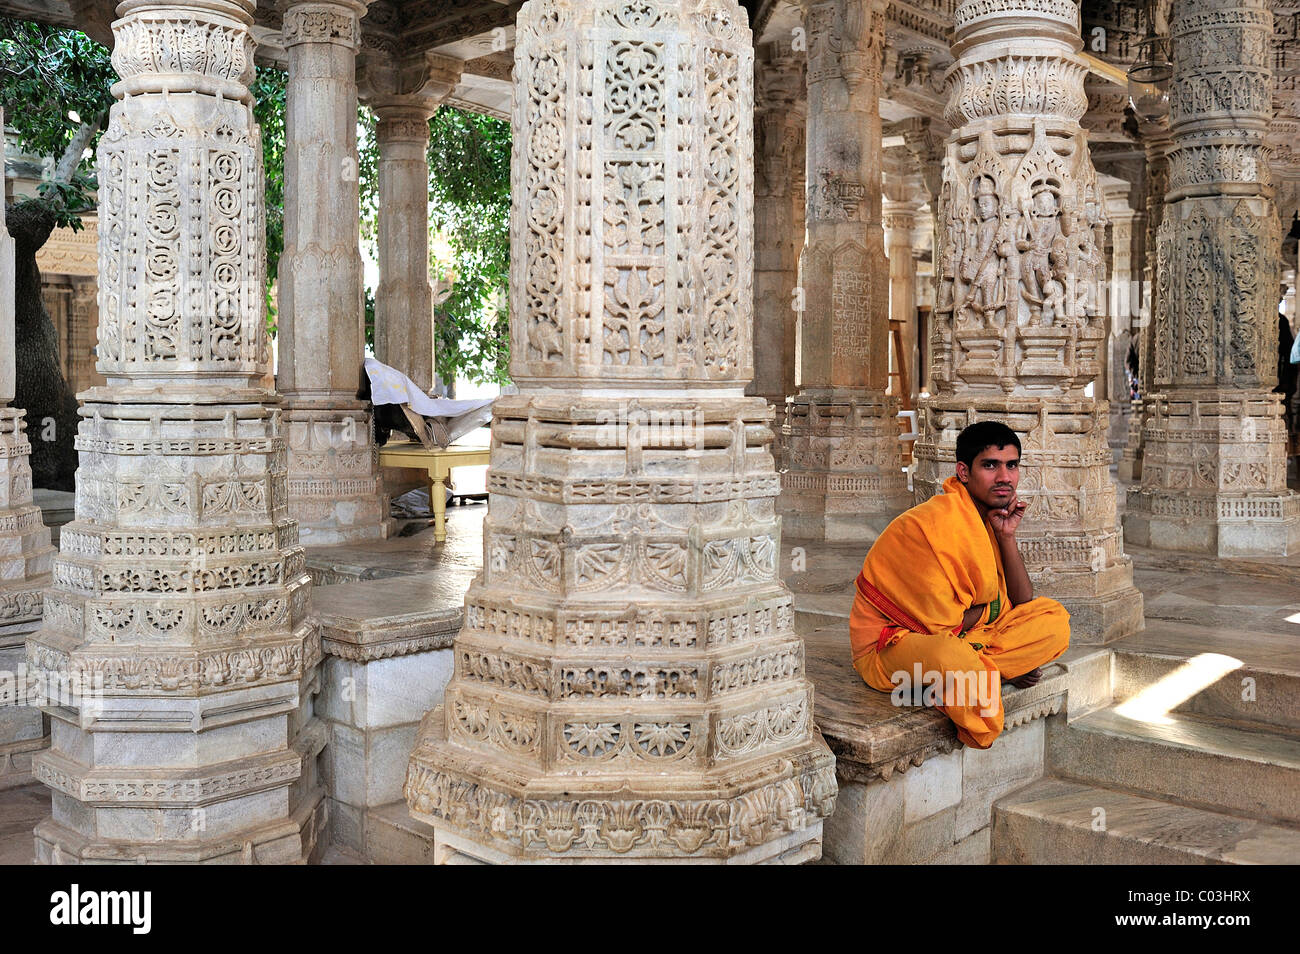 Young monk wearing the traditional yellow monk's robe in the inner hall with ornate marble pillars in the Temple of Ranakpur Stock Photo